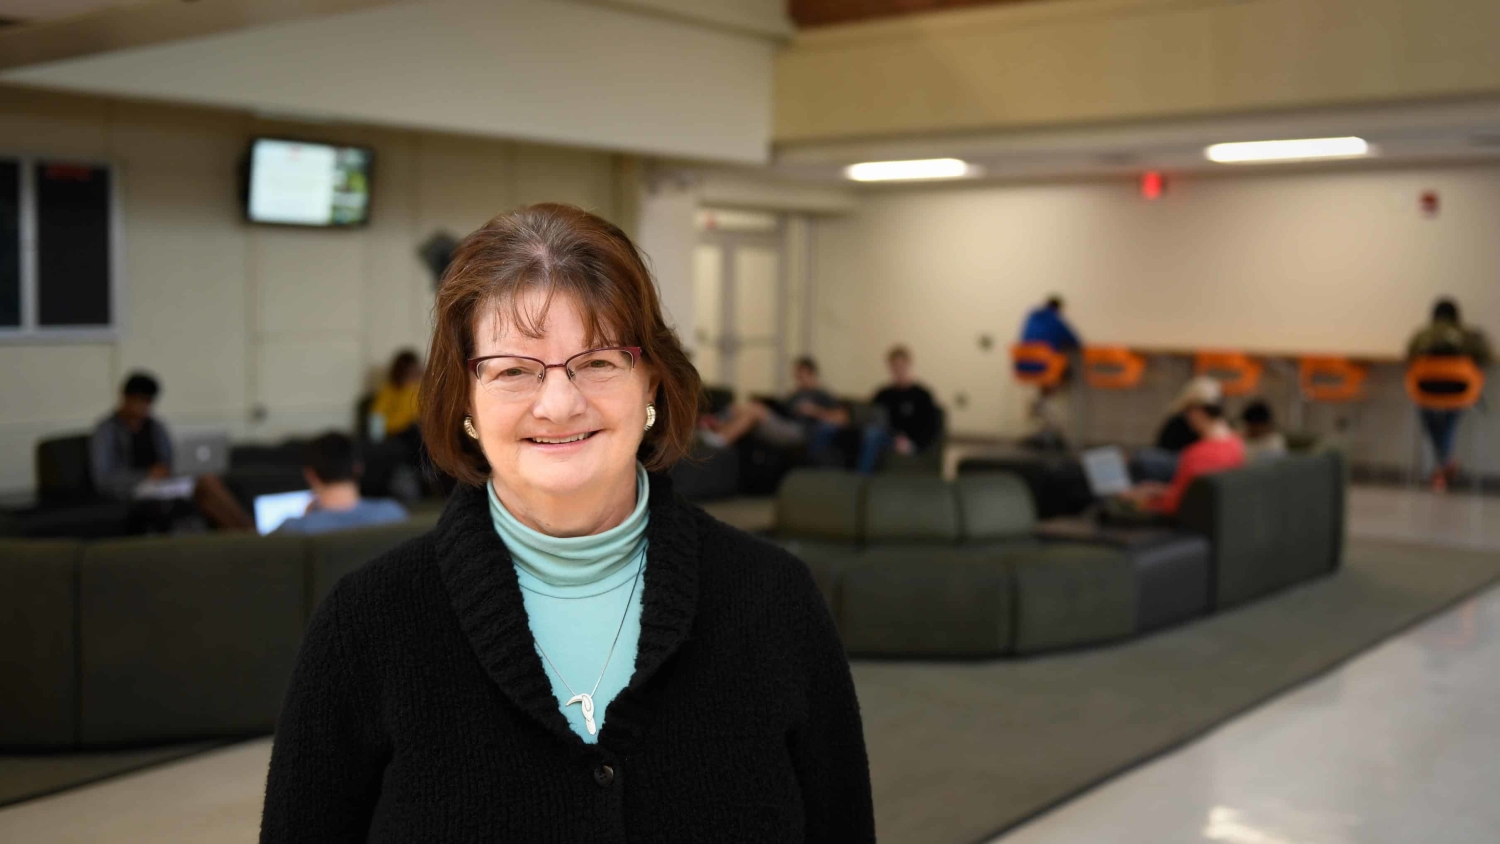 Statistics alumna Nancy Ridenhour in the commons area in Cox Hall with students working in the background